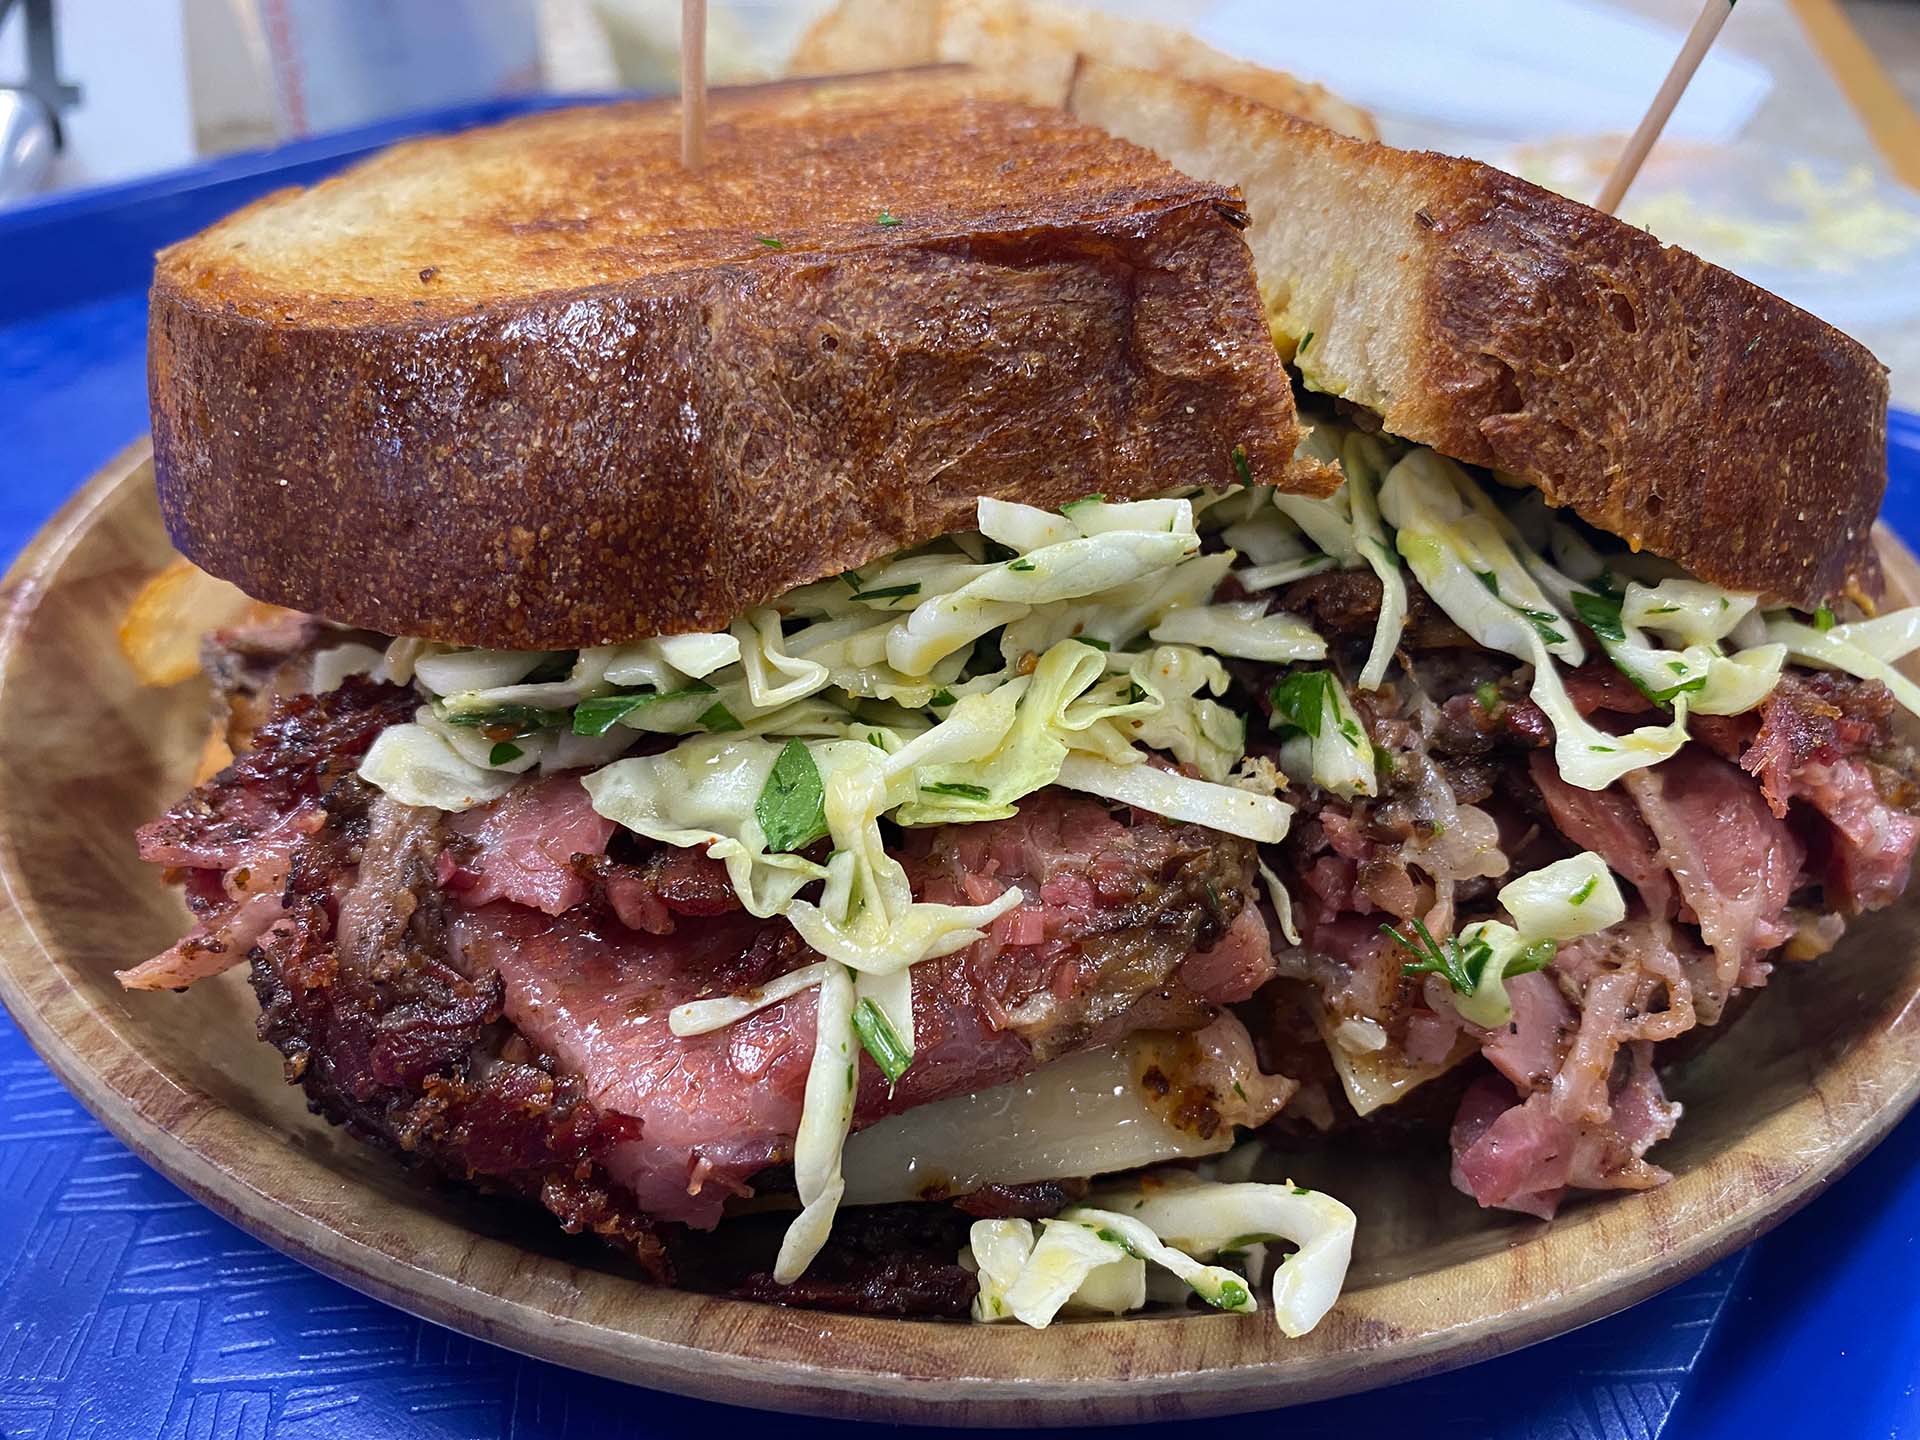 A massive sandwich overflowing with pastrami and slaw.